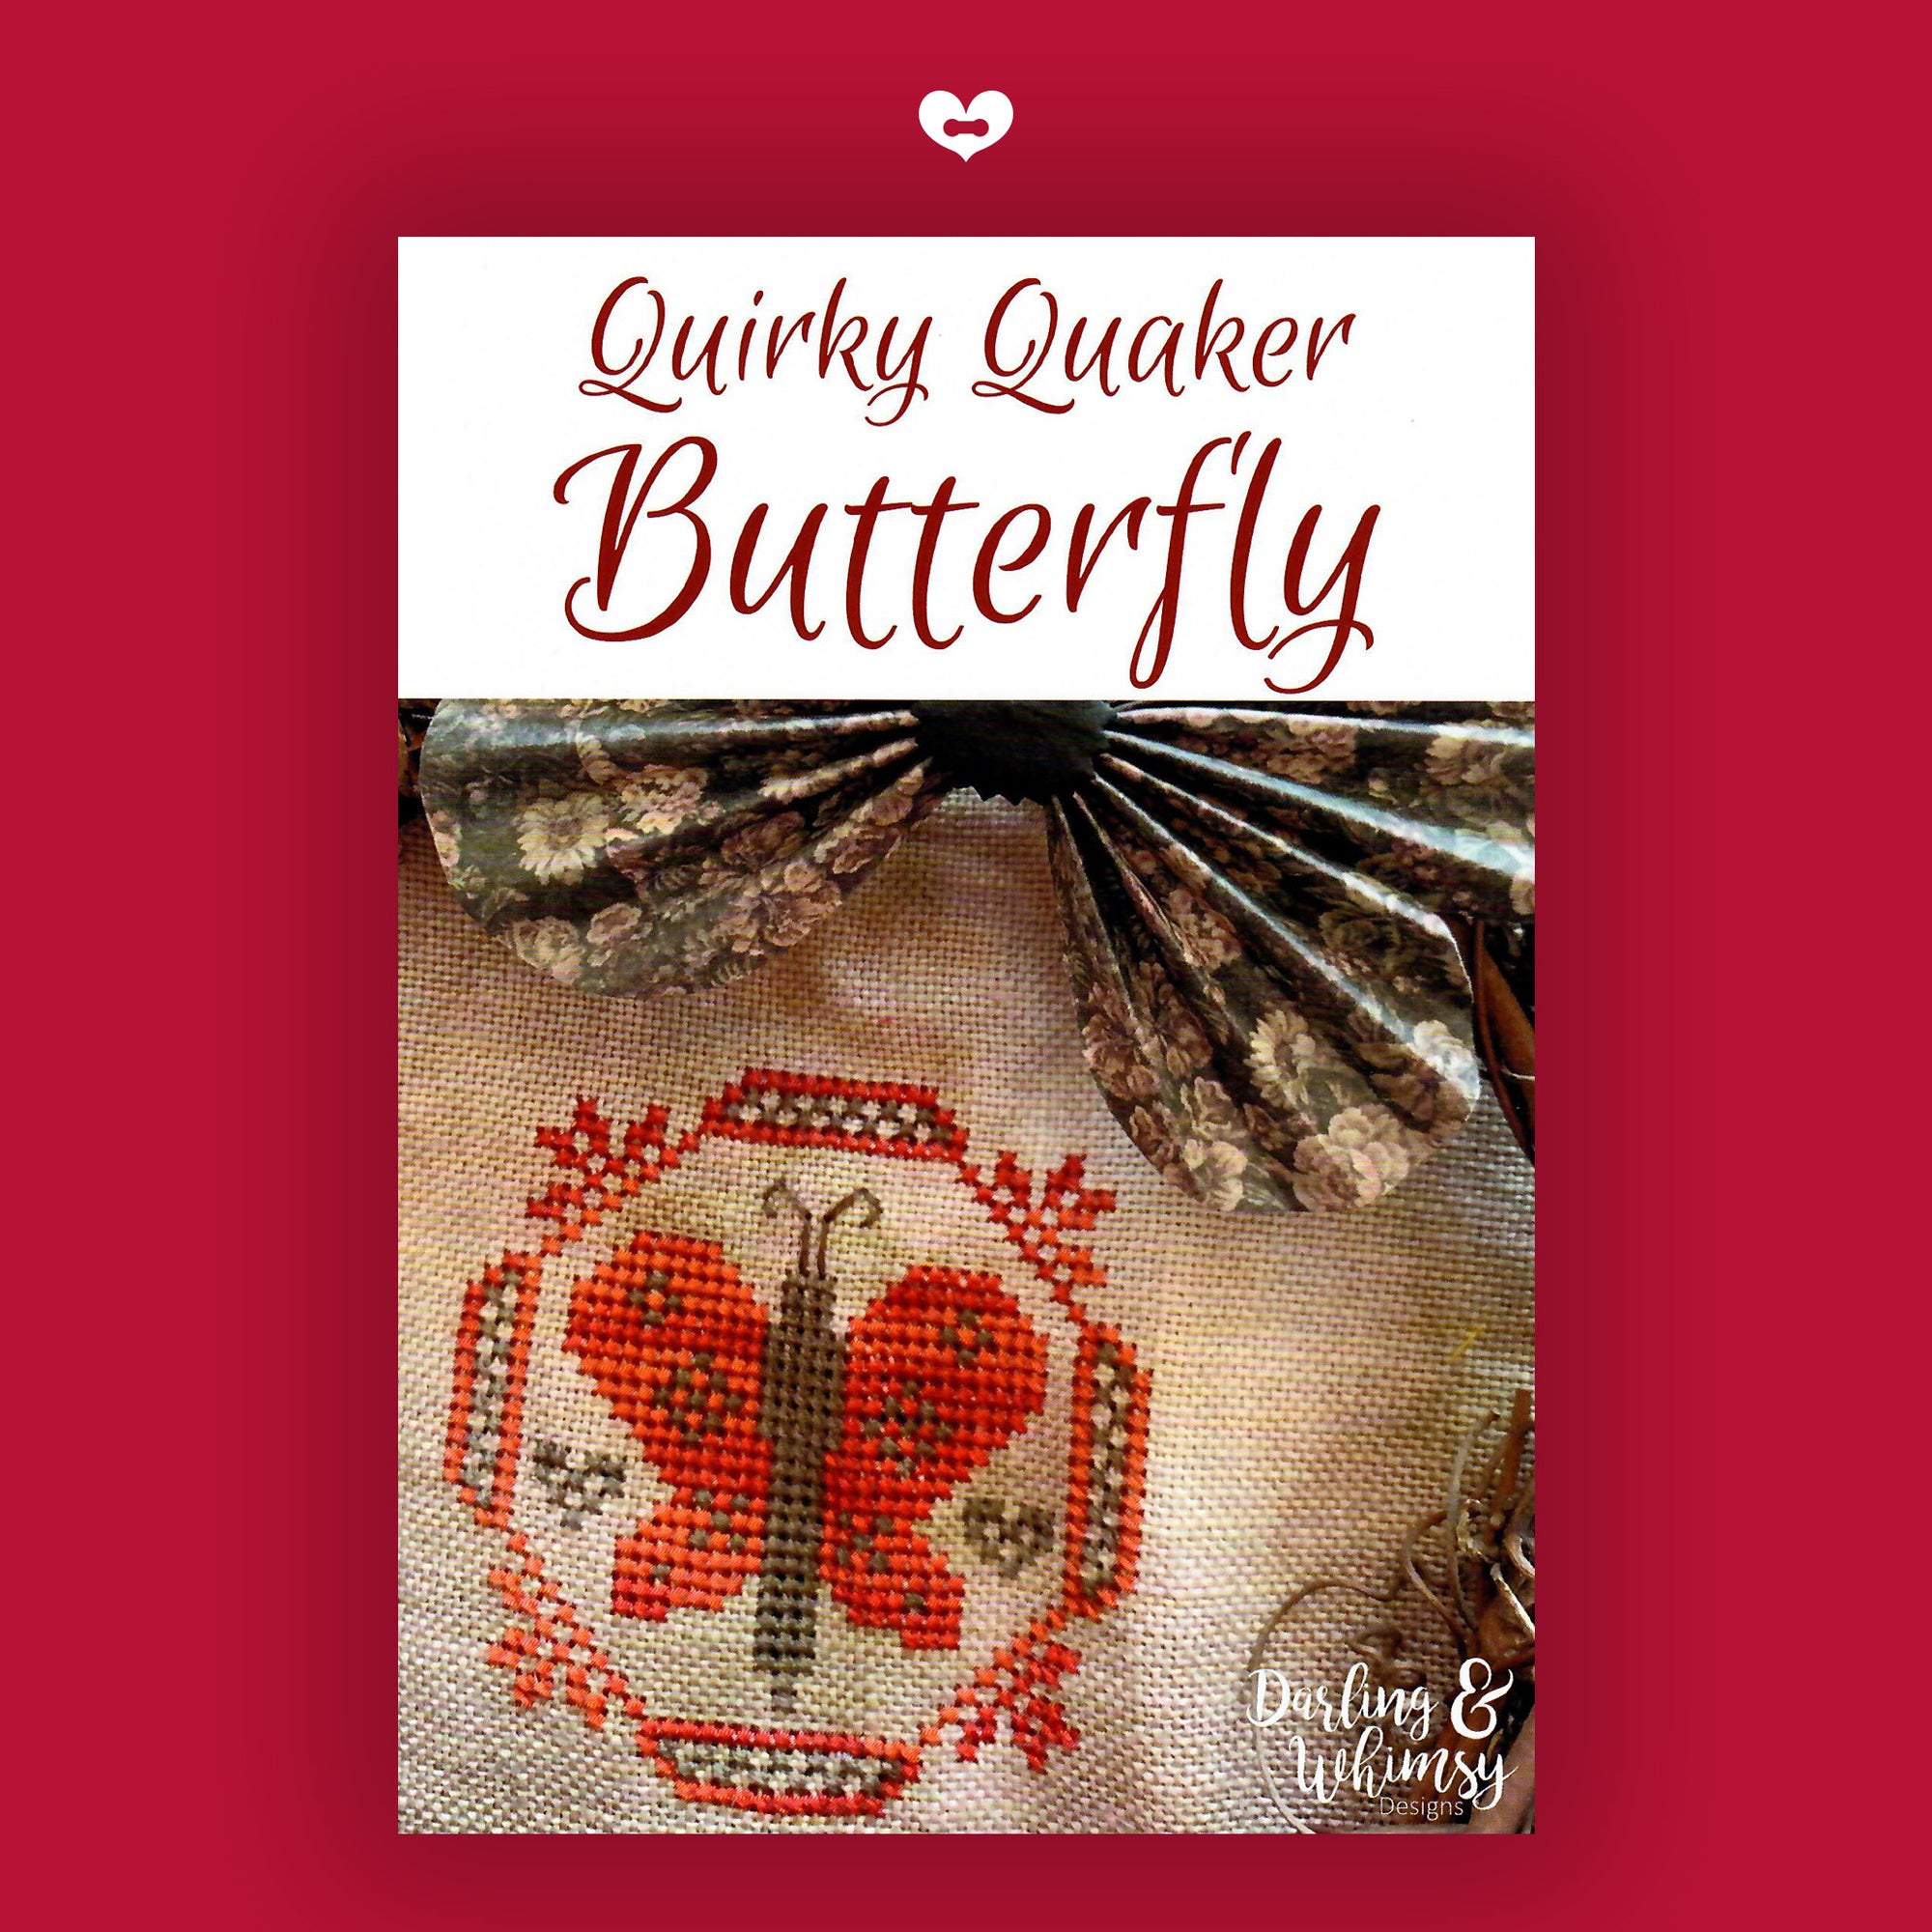 Quirky Quaker: Butterfly